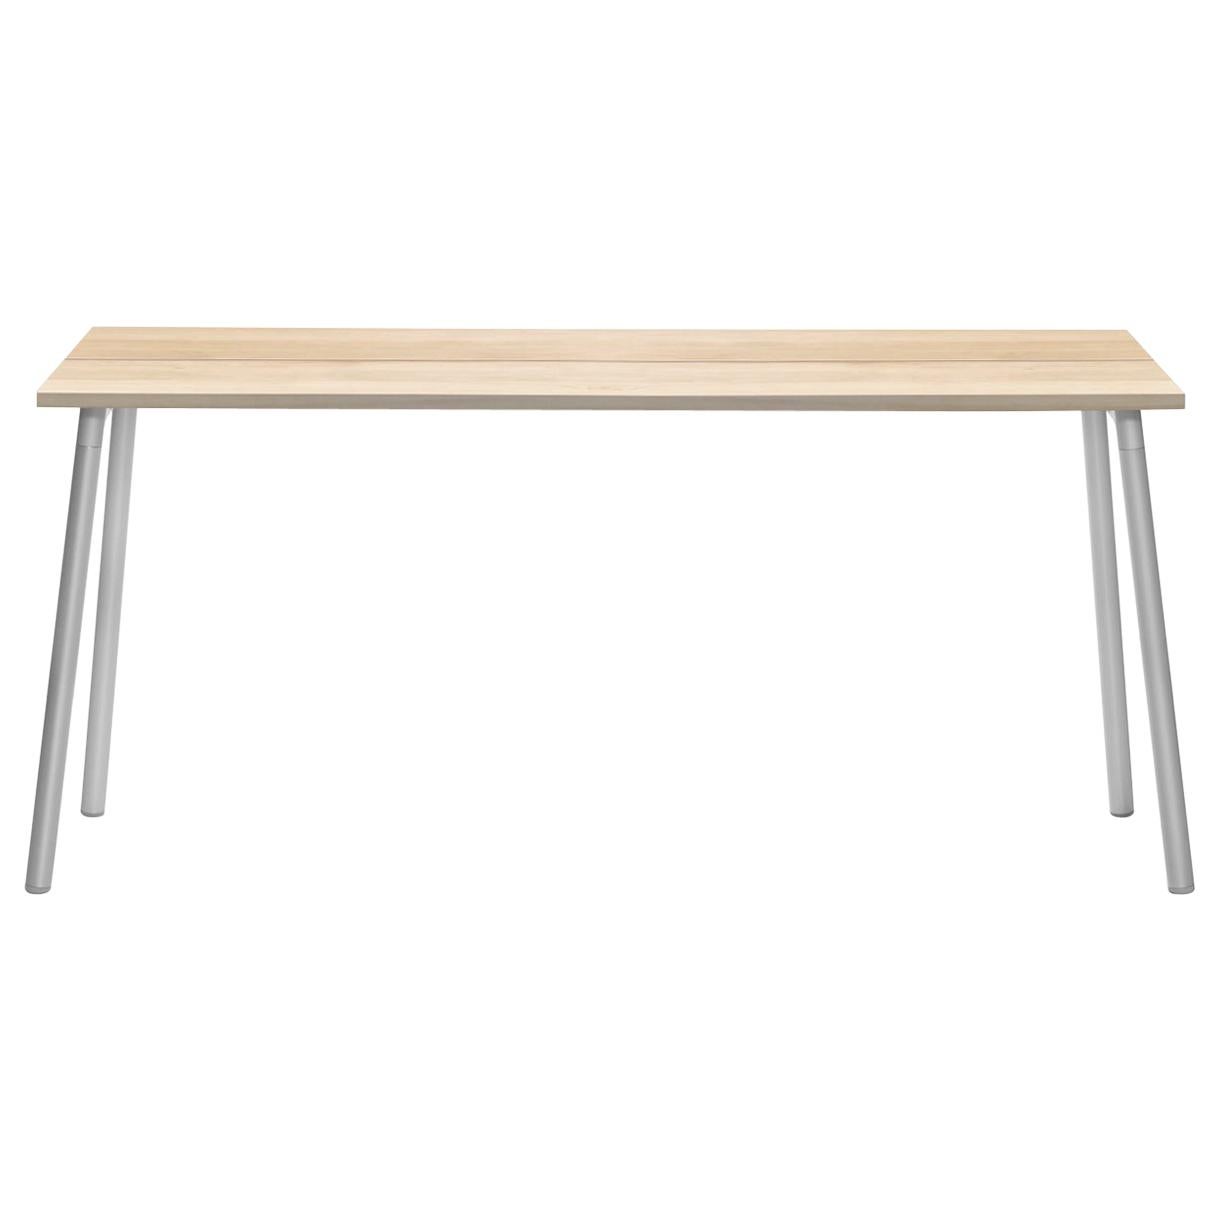 Emeco Run 62" Side Table Aluminum Frame & Wood Top by Sam Hecht and Kim Colin